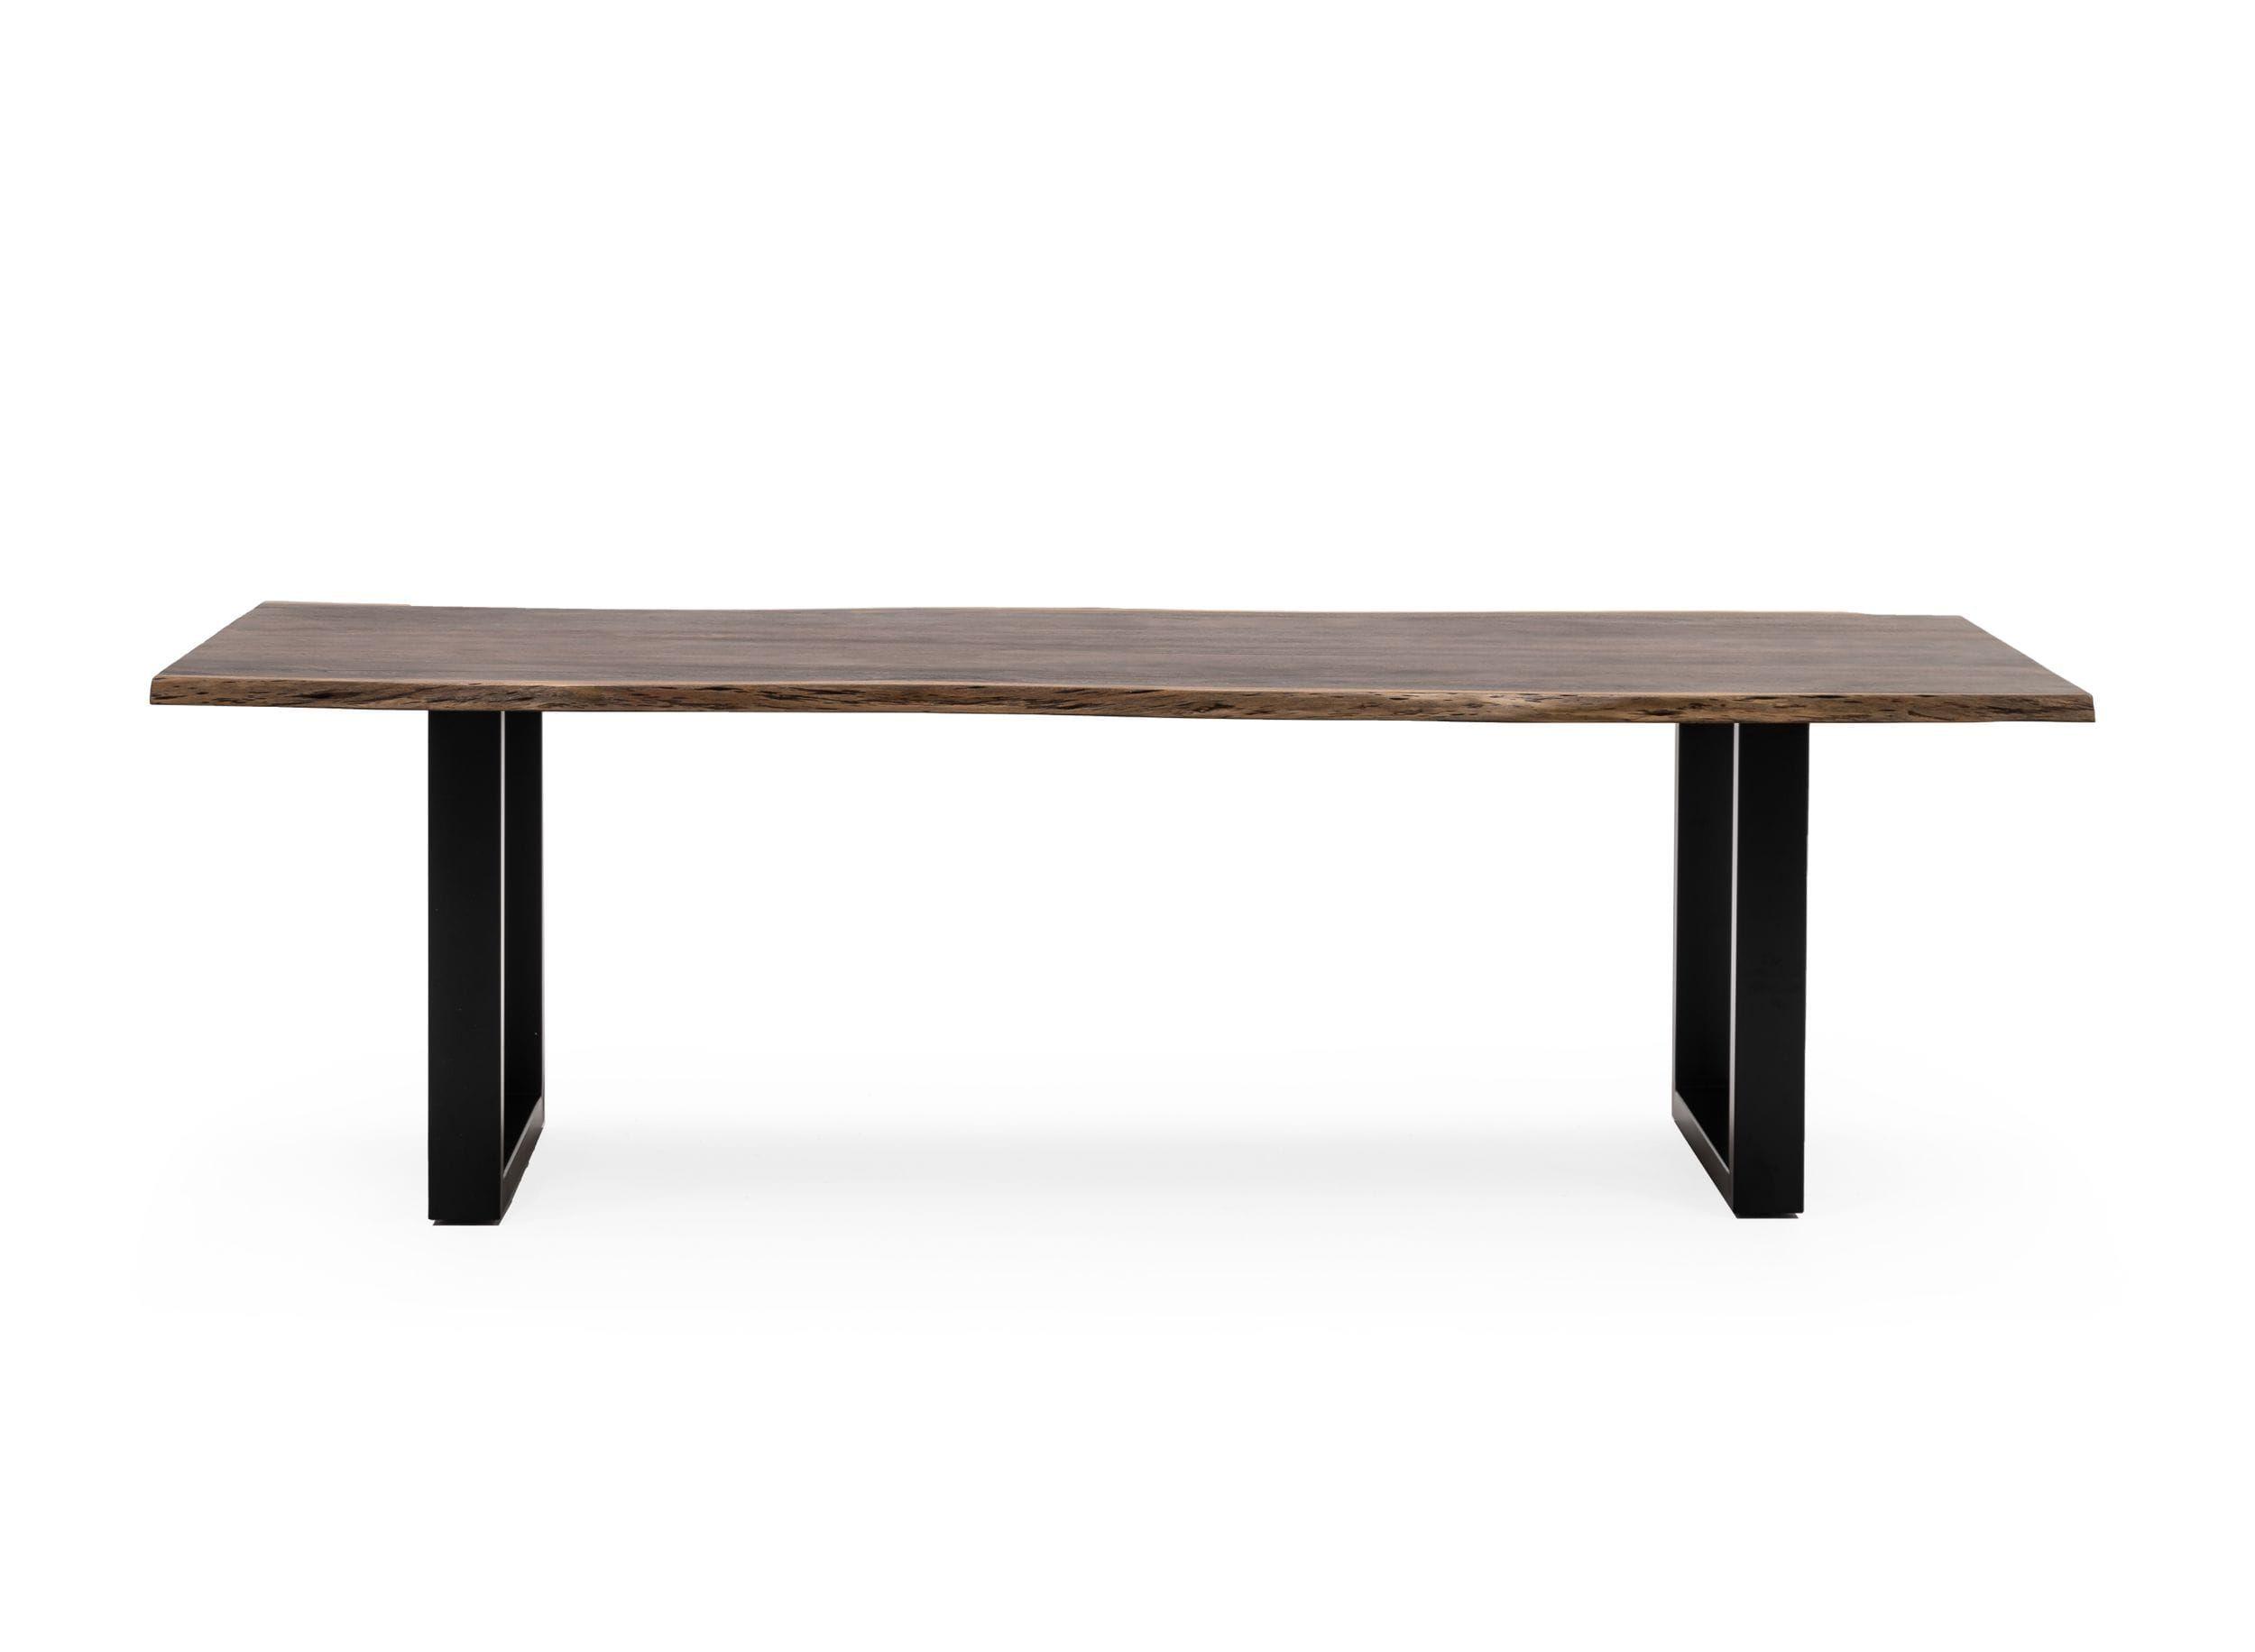 Contemporary, Modern Dining Table Taylor VGEDPRO220001 in Dark Brown 